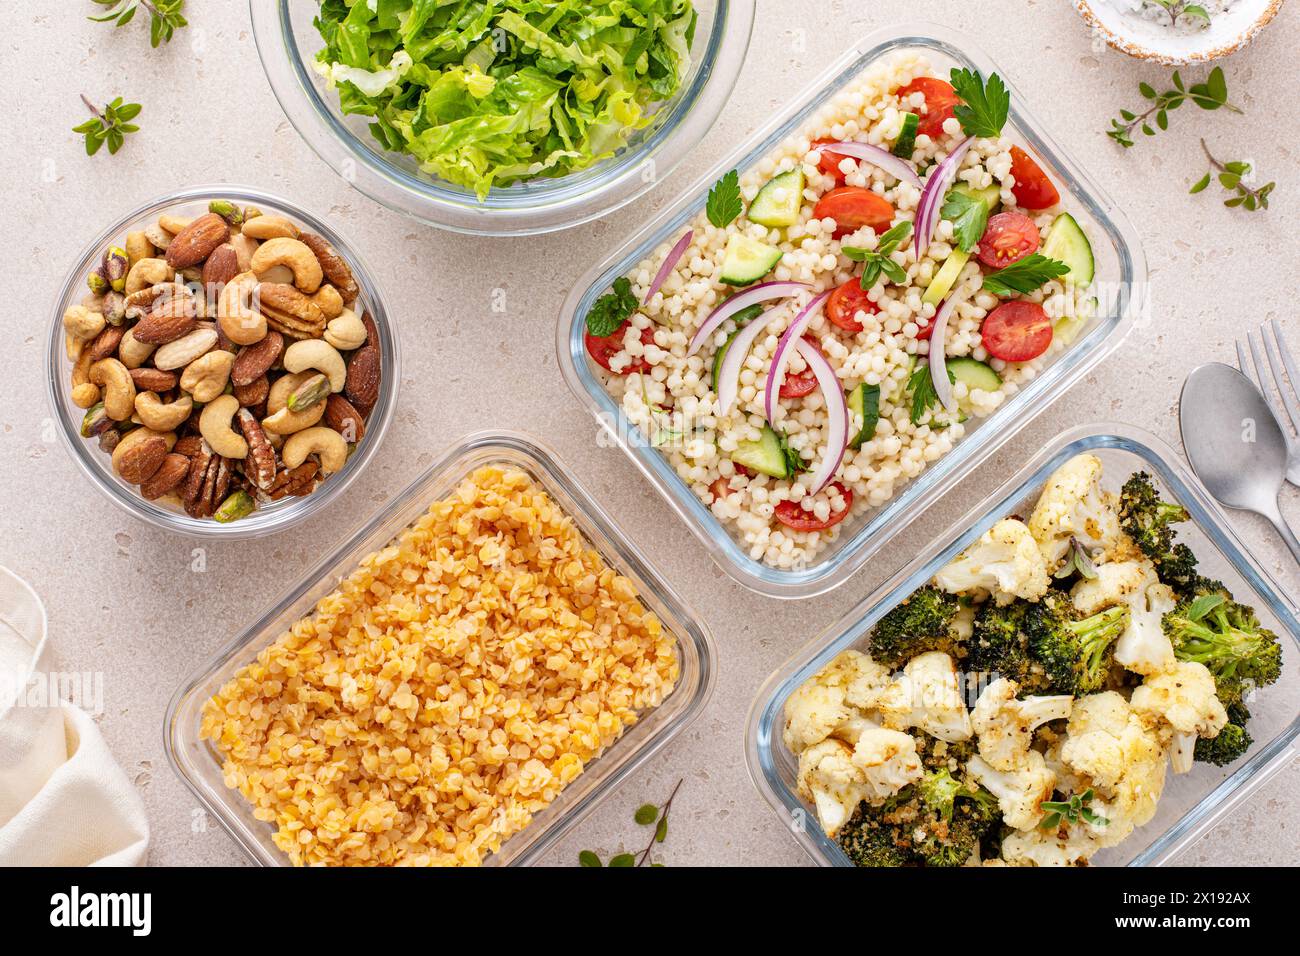 Healthy vegan meal prep with roasted vegetables, cooked lentils, couscous salad and mixed nuts Stock Photo